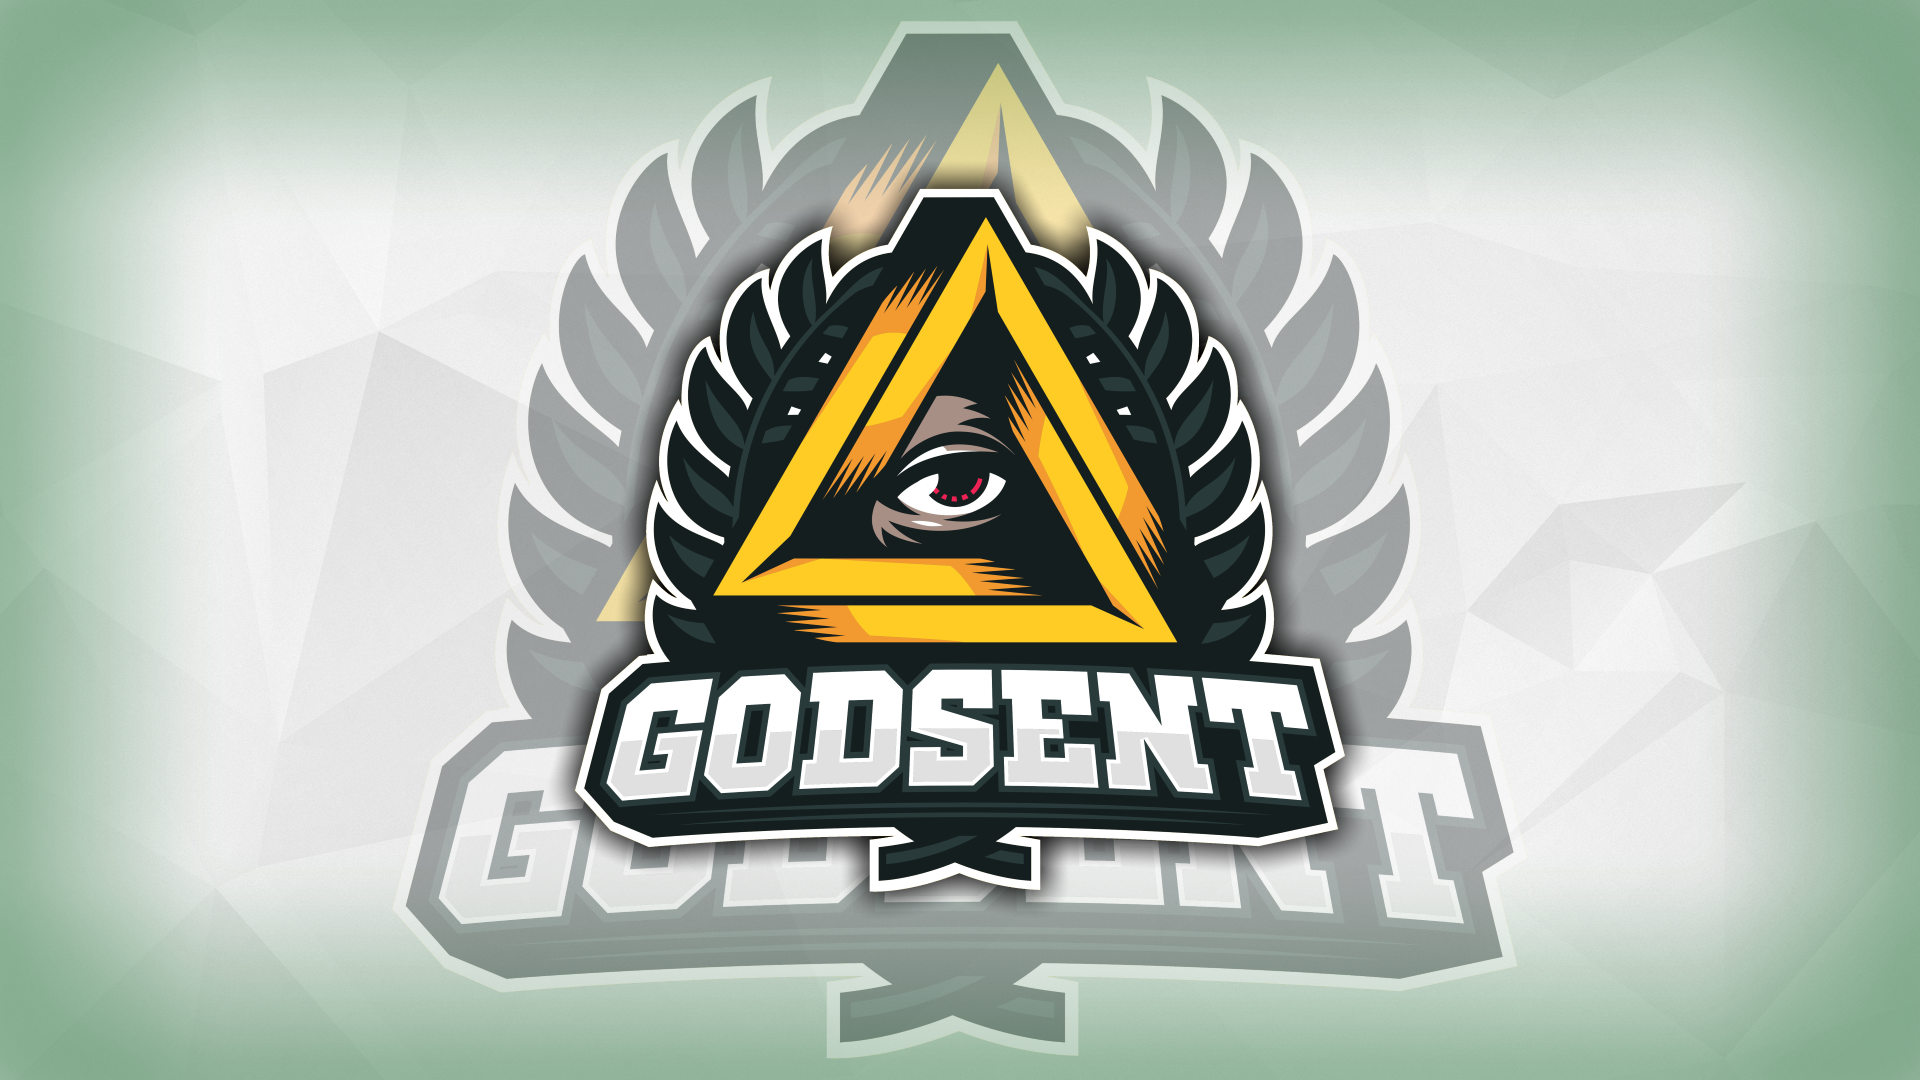 General 1920x1080 Counter-Strike: Global Offensive GODSENT PC gaming e-sports